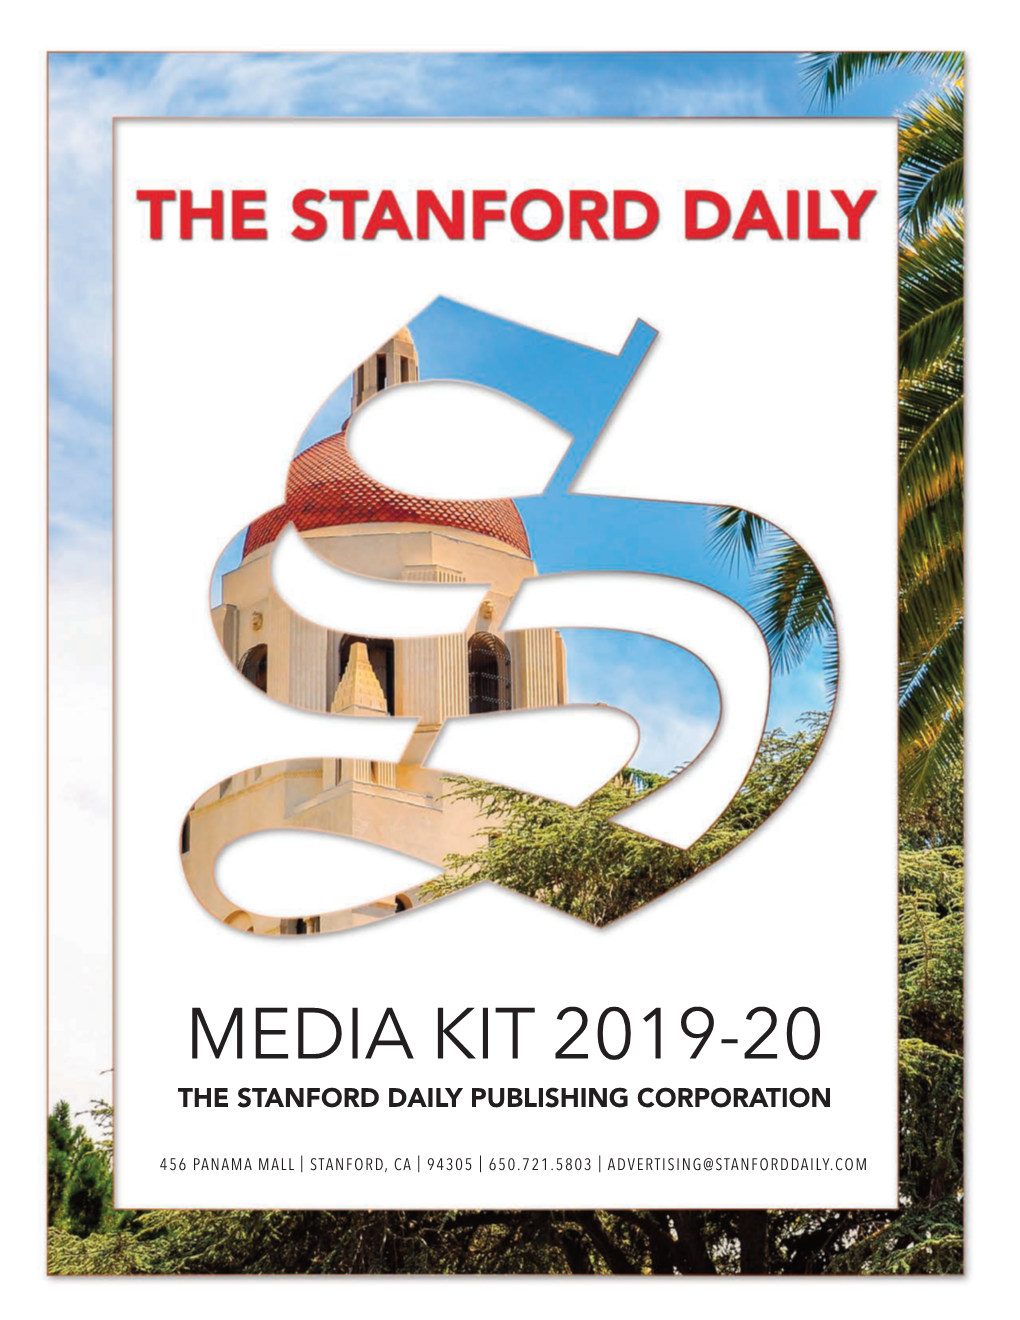 Media Kit 2019-20 the Stanford Daily Publishing Corporation